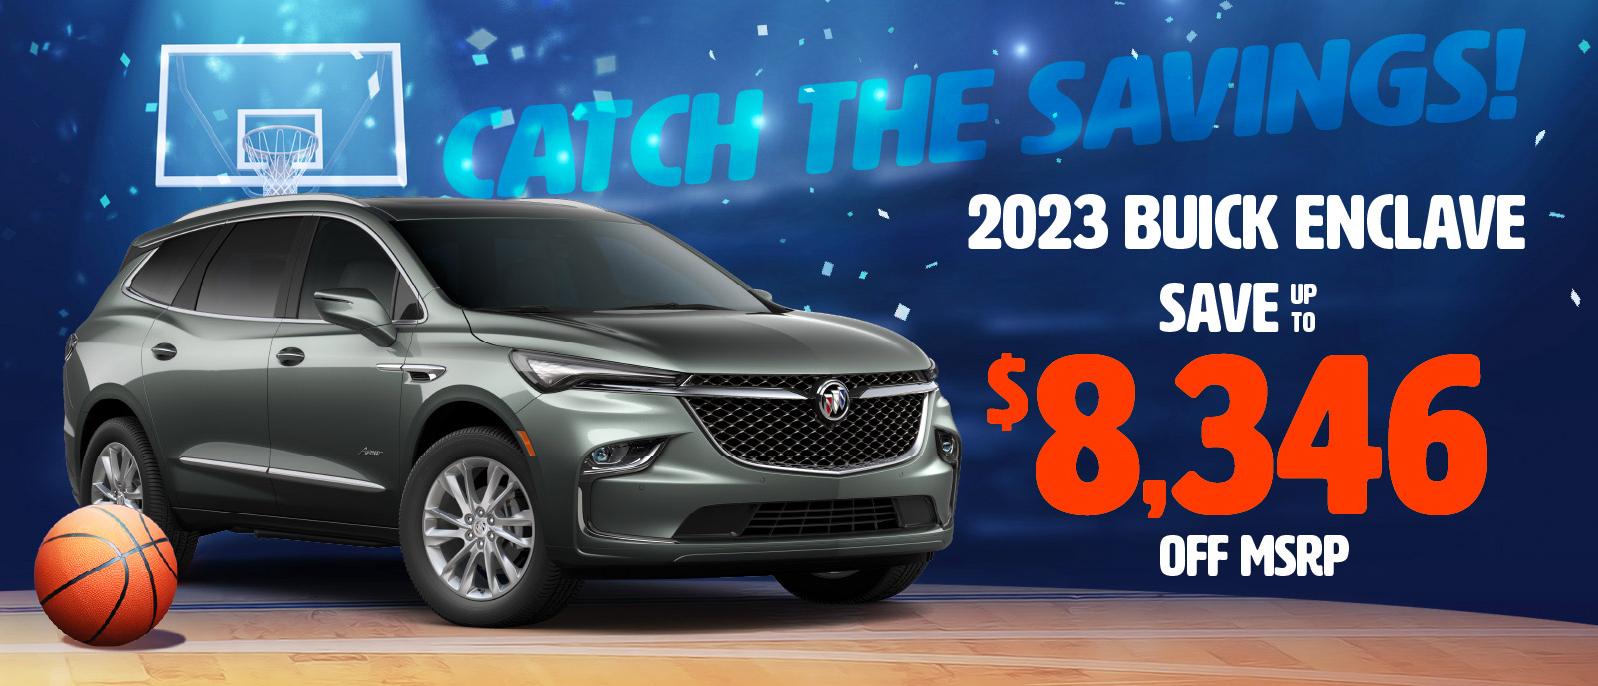 2023 Buick Enclave - SAVE up to $8346